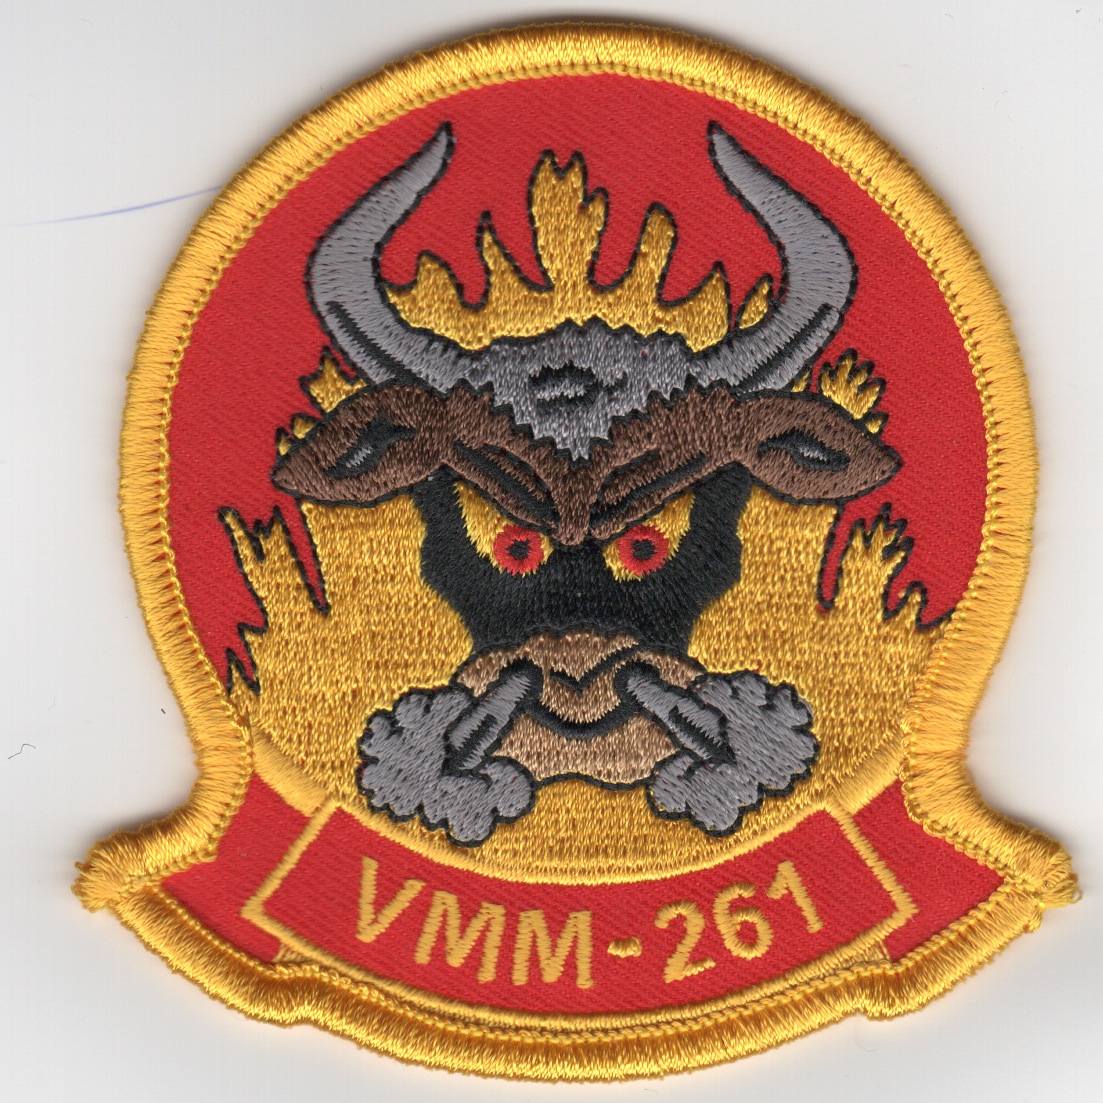 VMM-261 Squadron Patch (Red/Yellow)